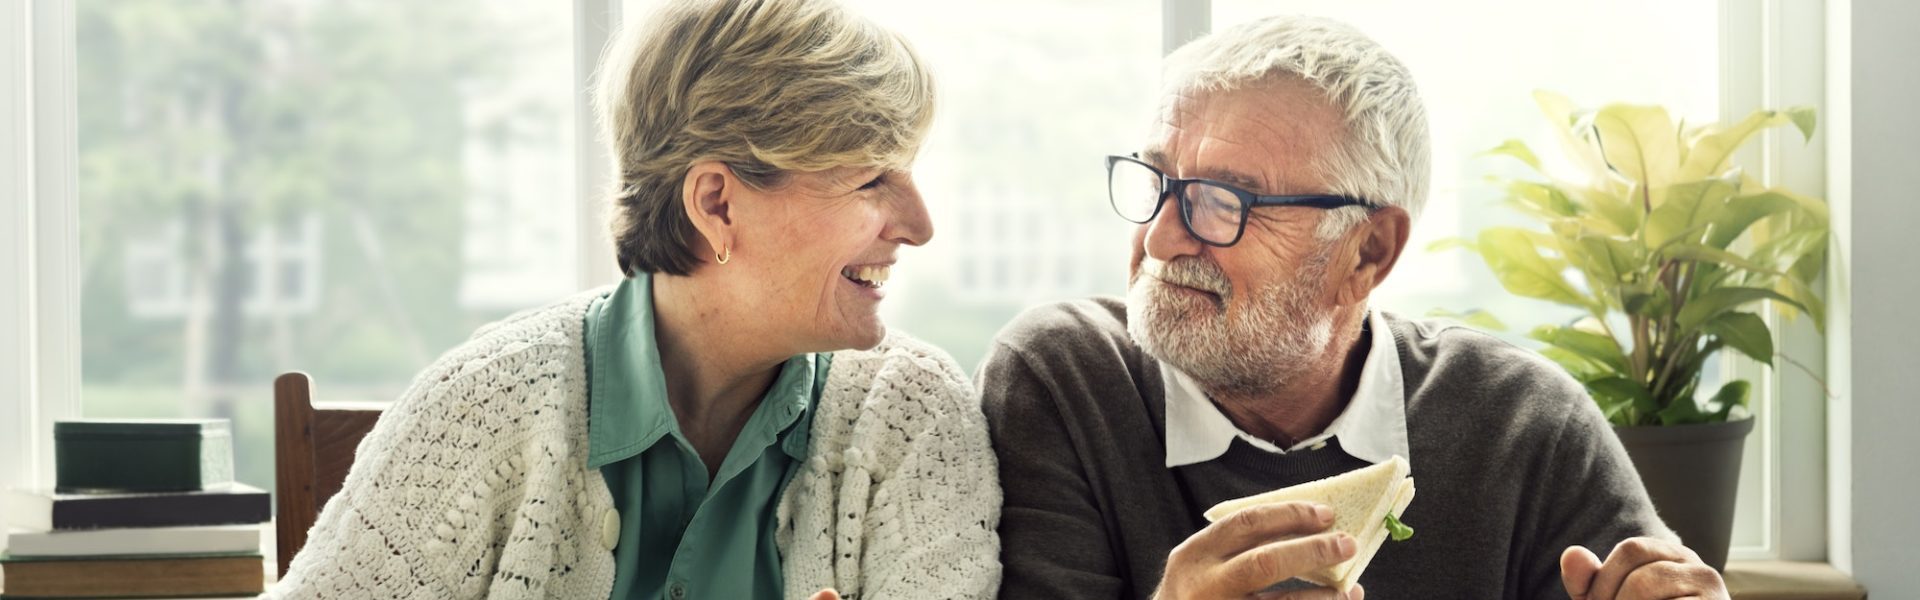 Senior couple engaged in retirement planning using Veda Financial's online tools.